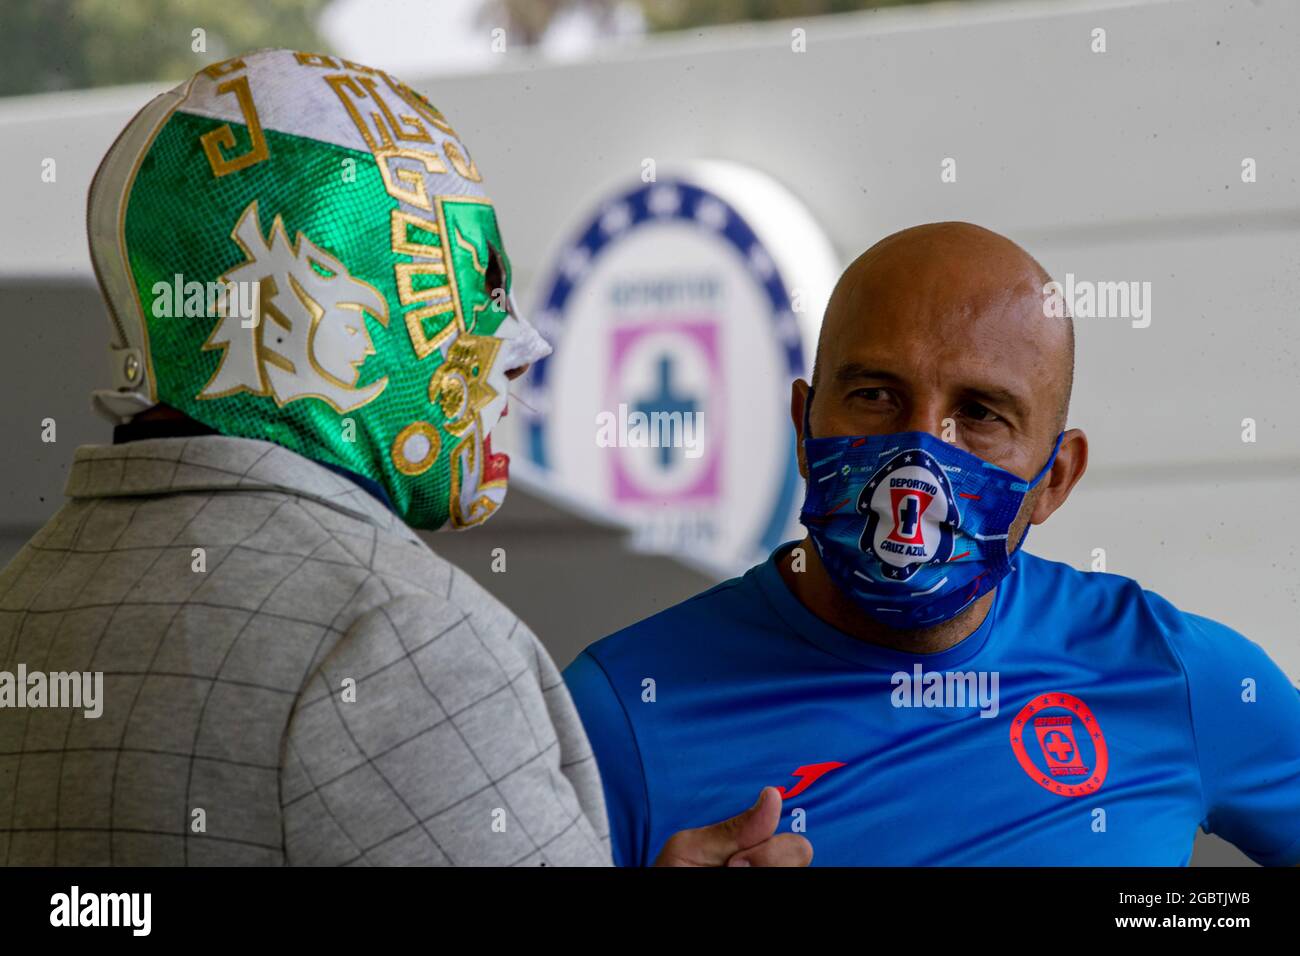 Non Exclusive: MEXICO CITY, MEXICO - AUGUST 4: Wrestler Dr Wagner meets with Oscar Perez  at press conference at La Noria, high performance center of Stock Photo